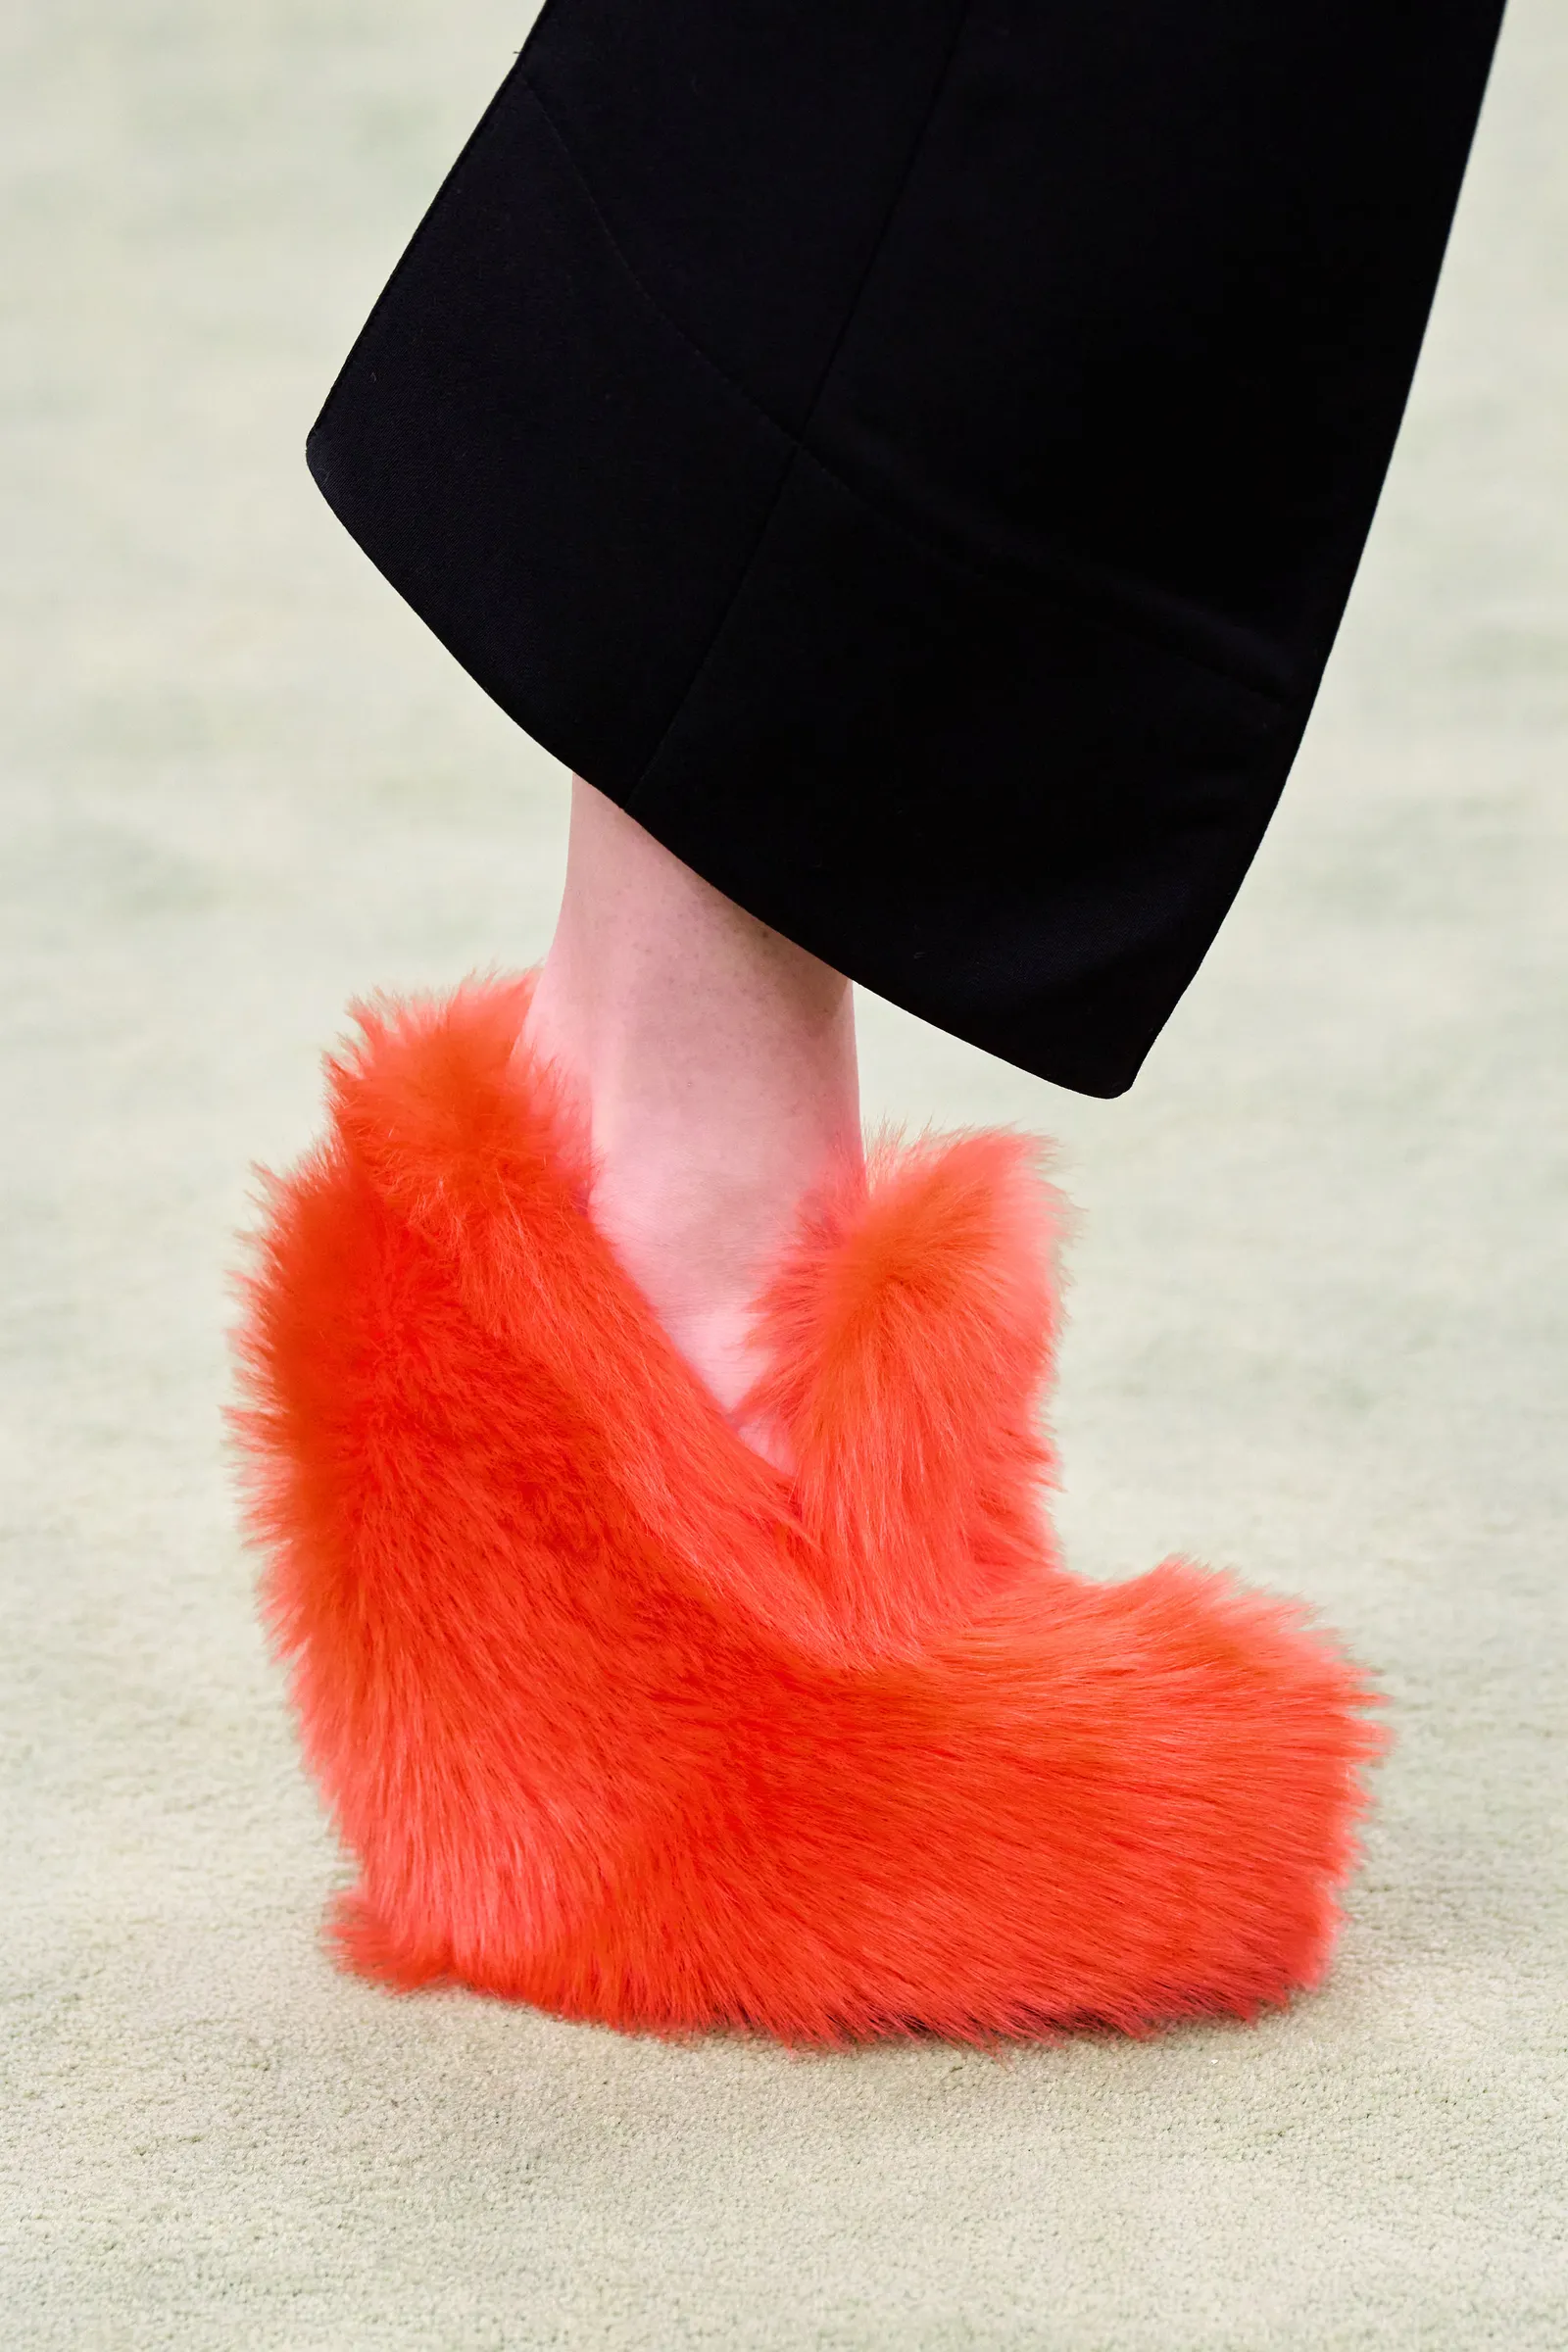 Leg warmers back in fashion with Prada selling 80s pair for eye